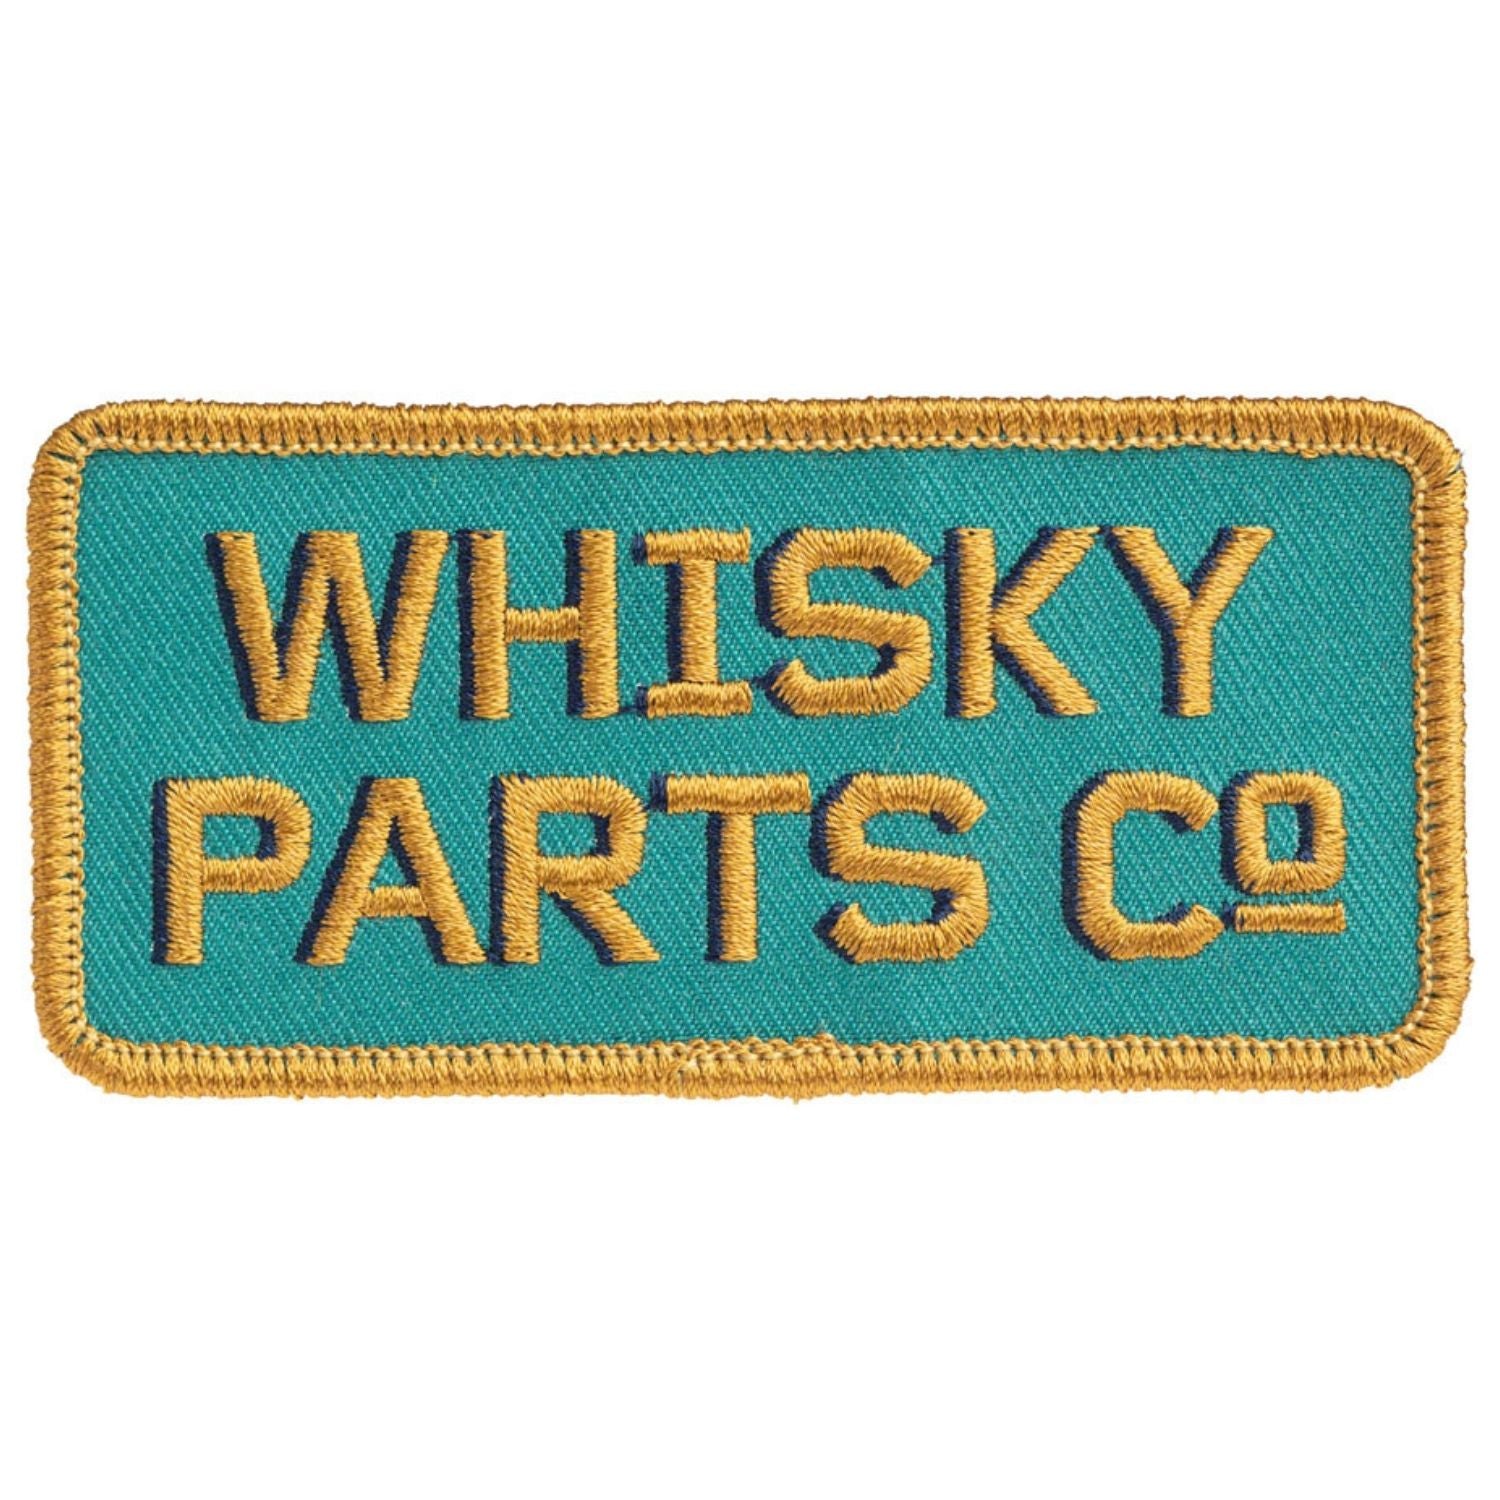 WHISKEY PART CO. Prospector Patch